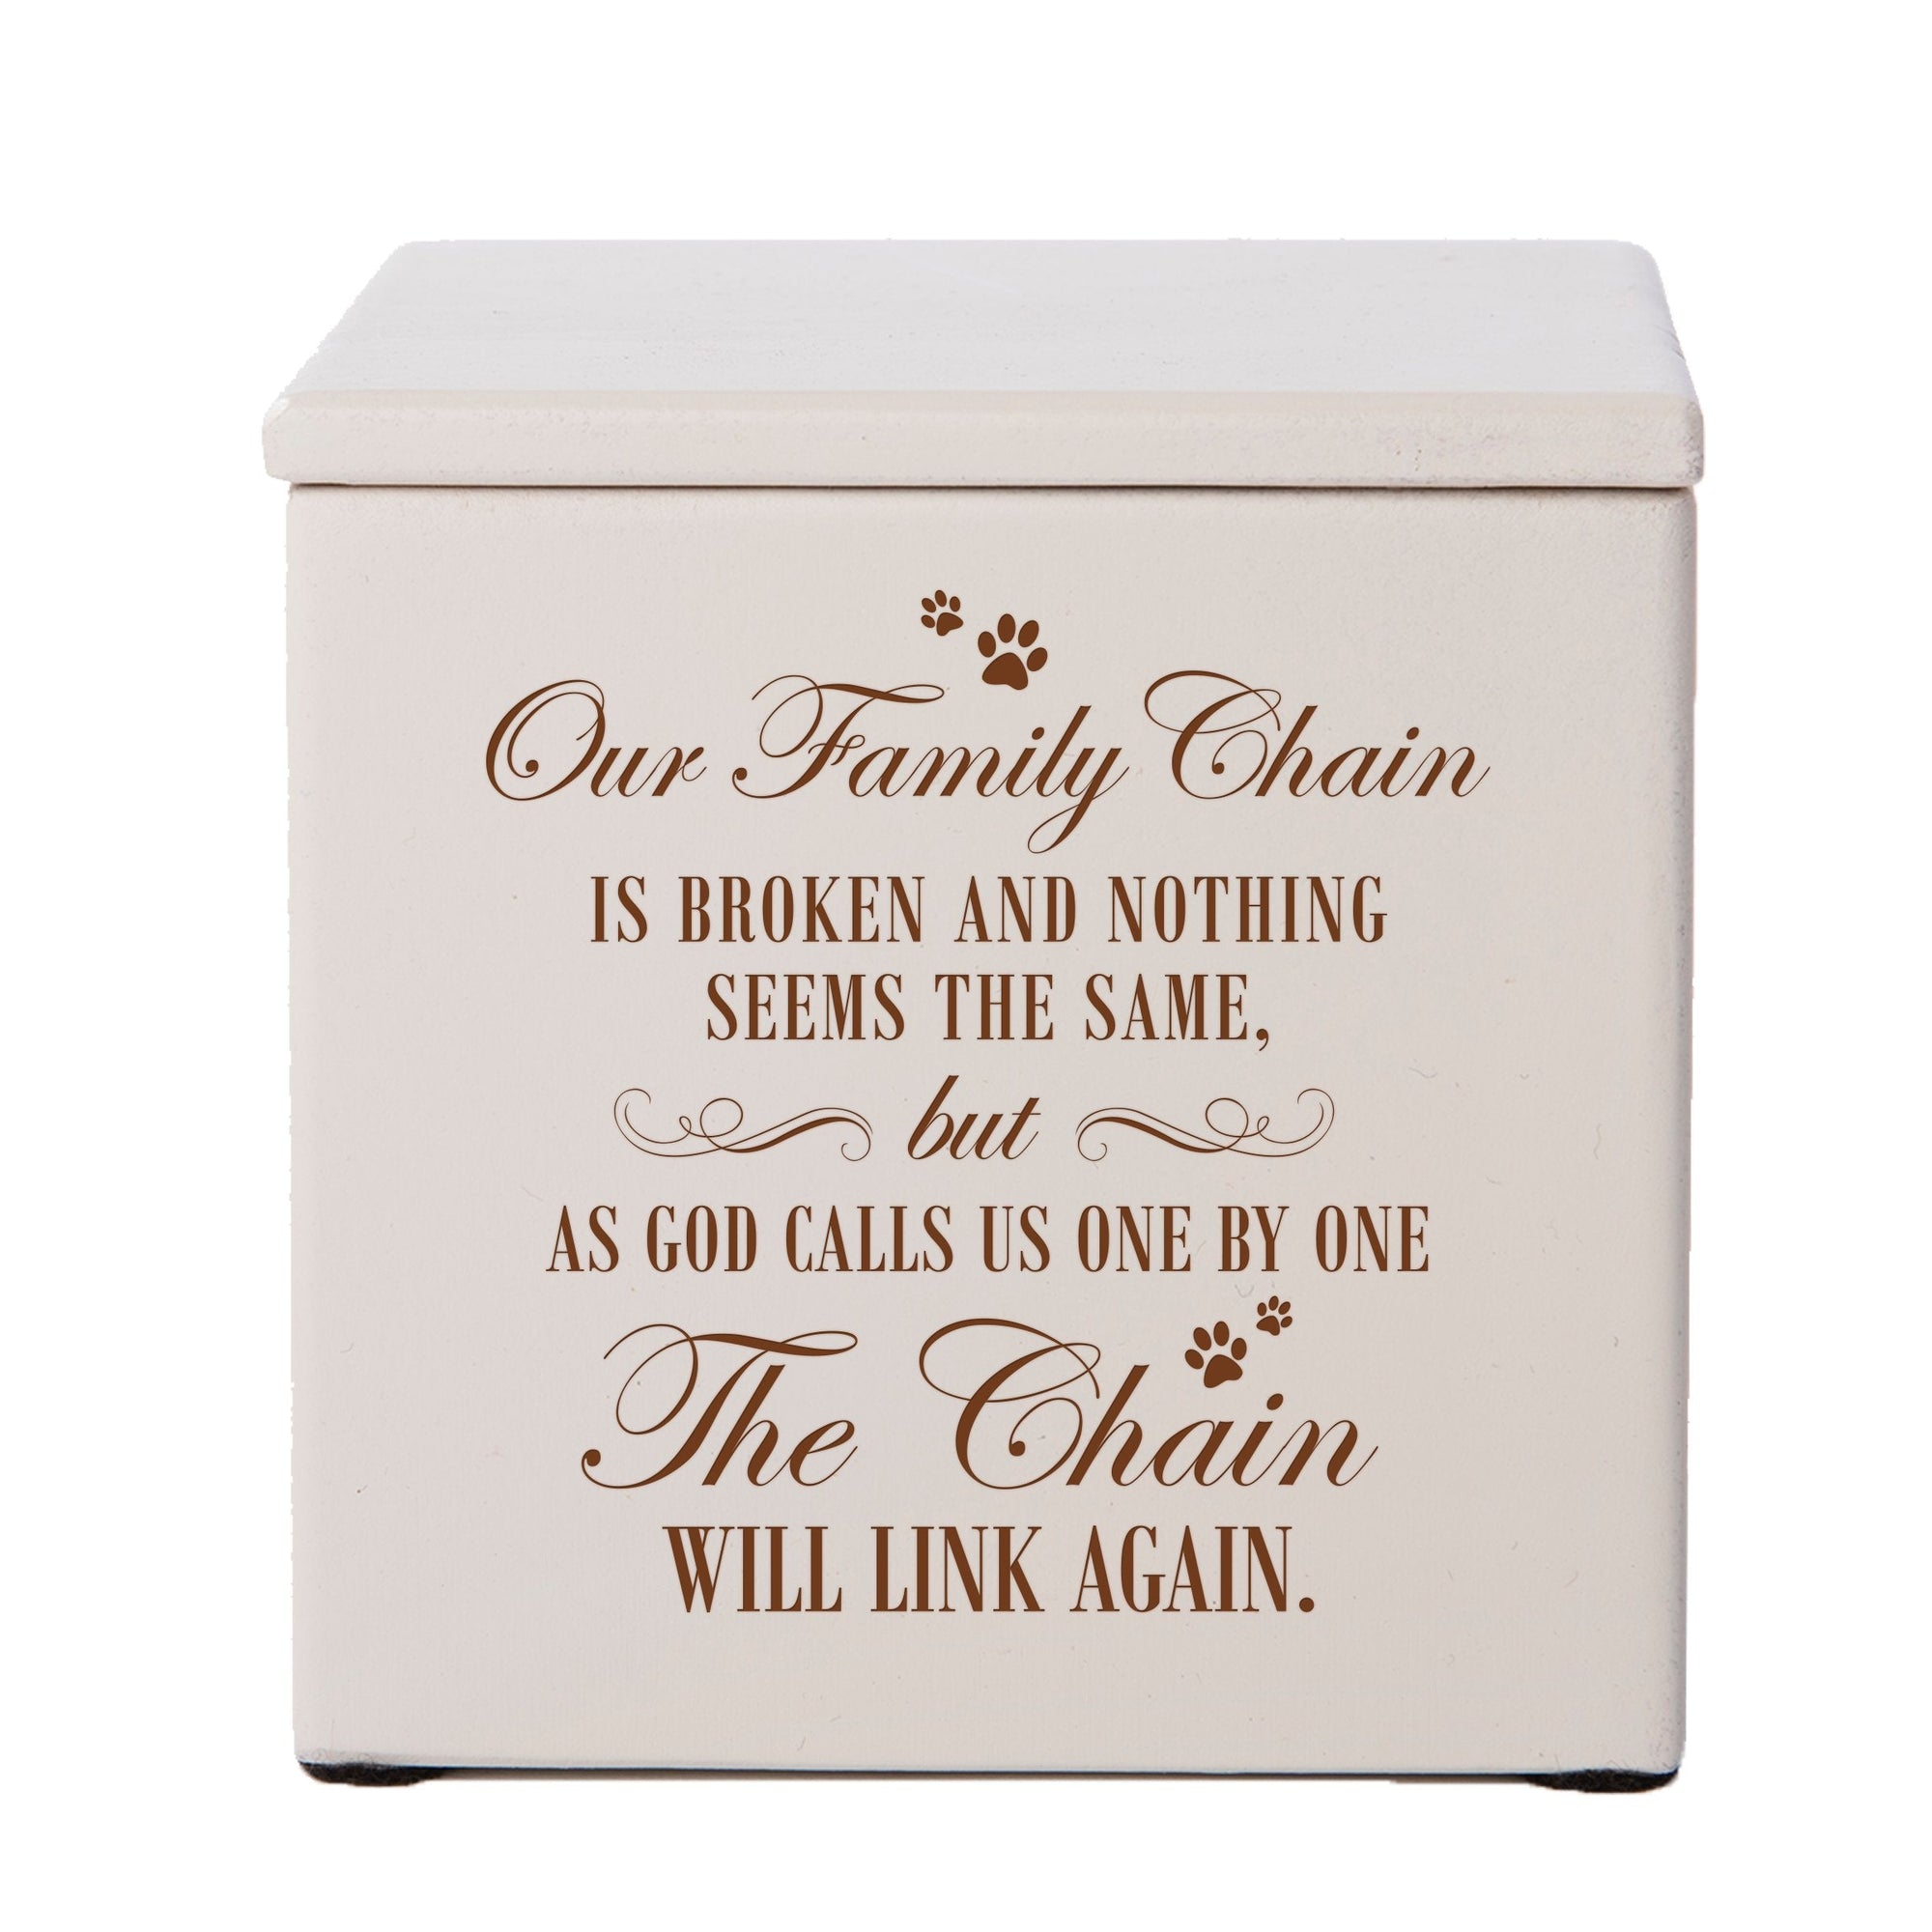 Ivory Pet Memorial 3.5x3.5 Keepsake Urn with phrase "Our Family Chain"